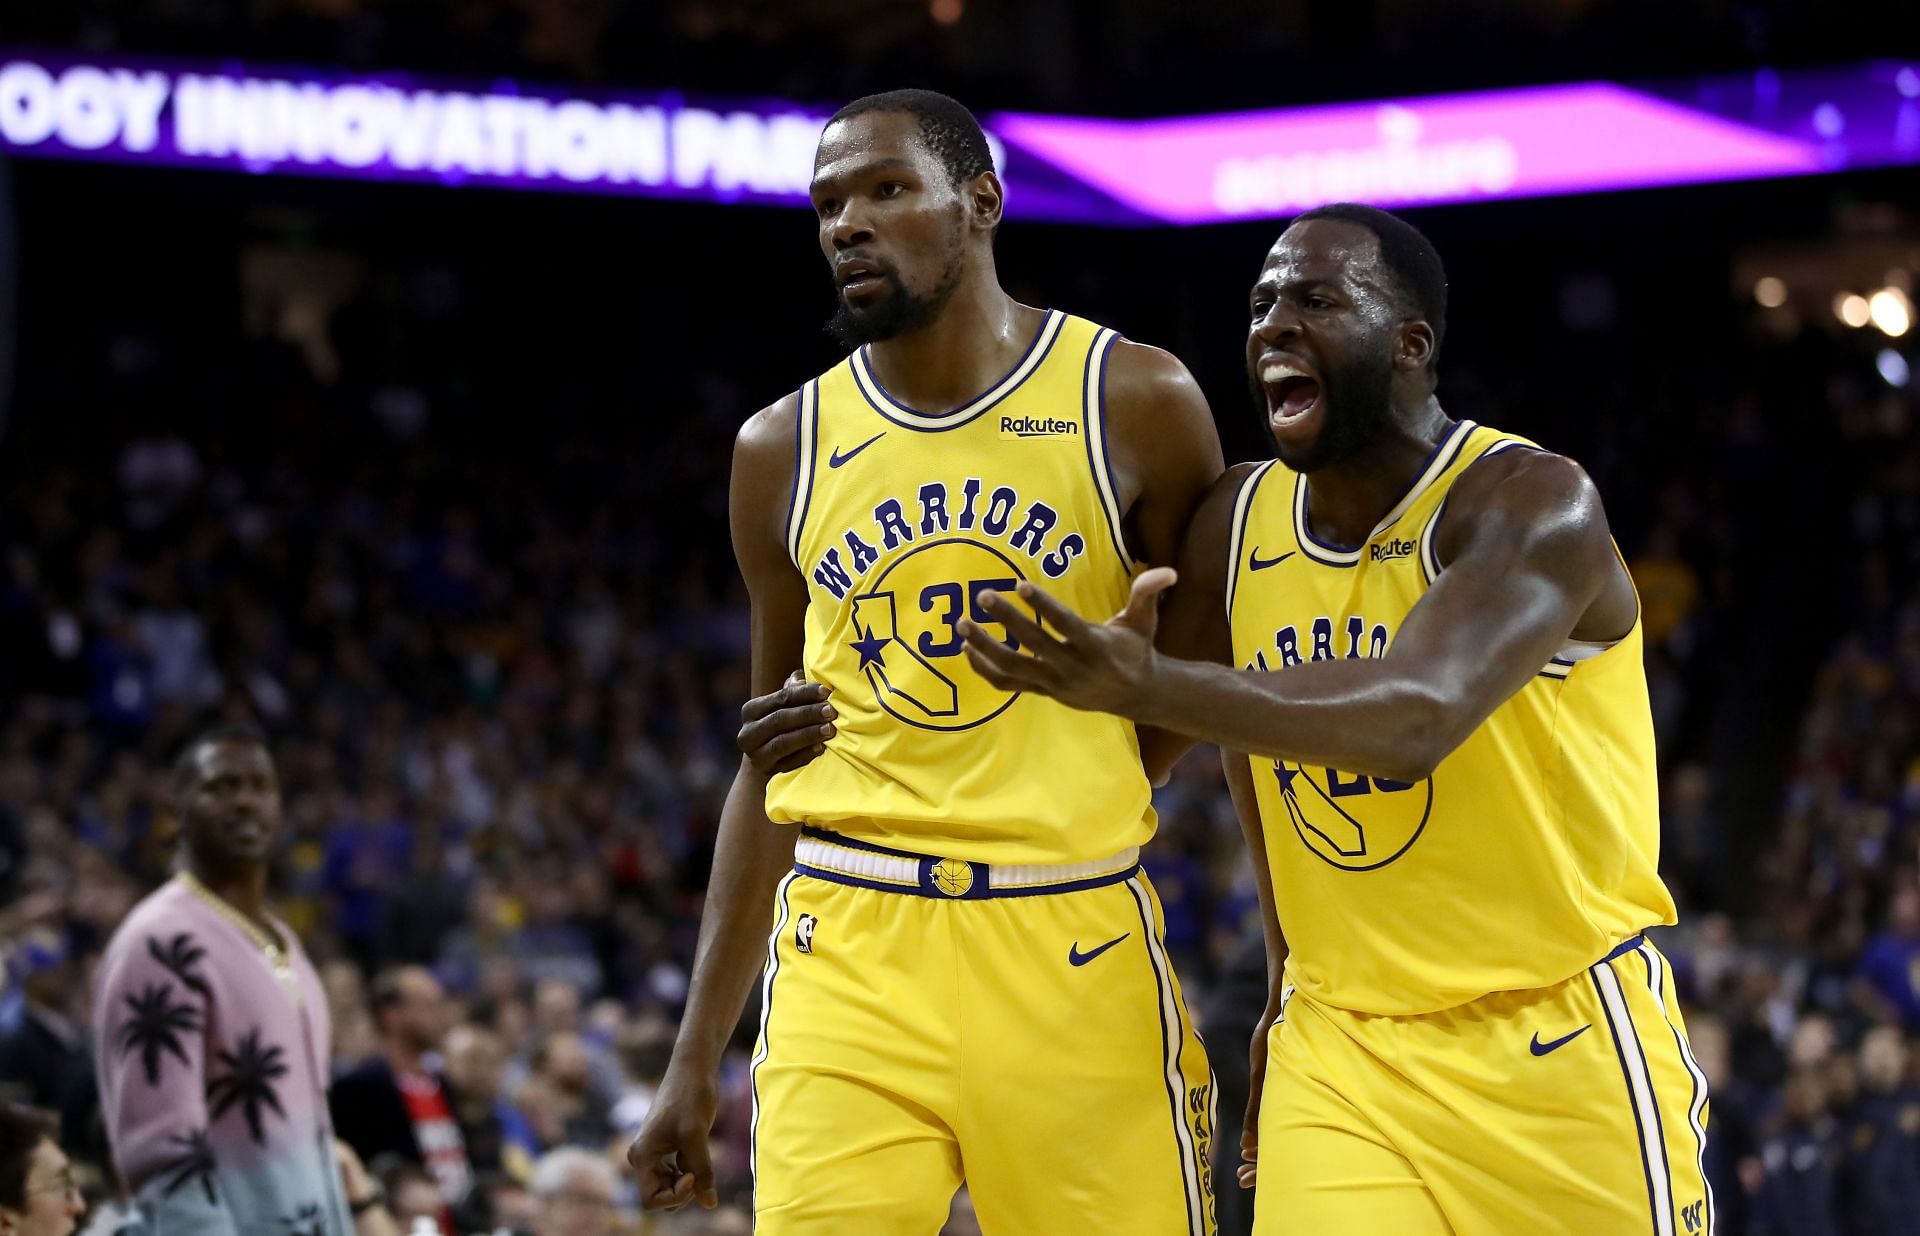  Kevin Durant made a mistake by leaving the Golden State Warriors, according to Draymond Green.